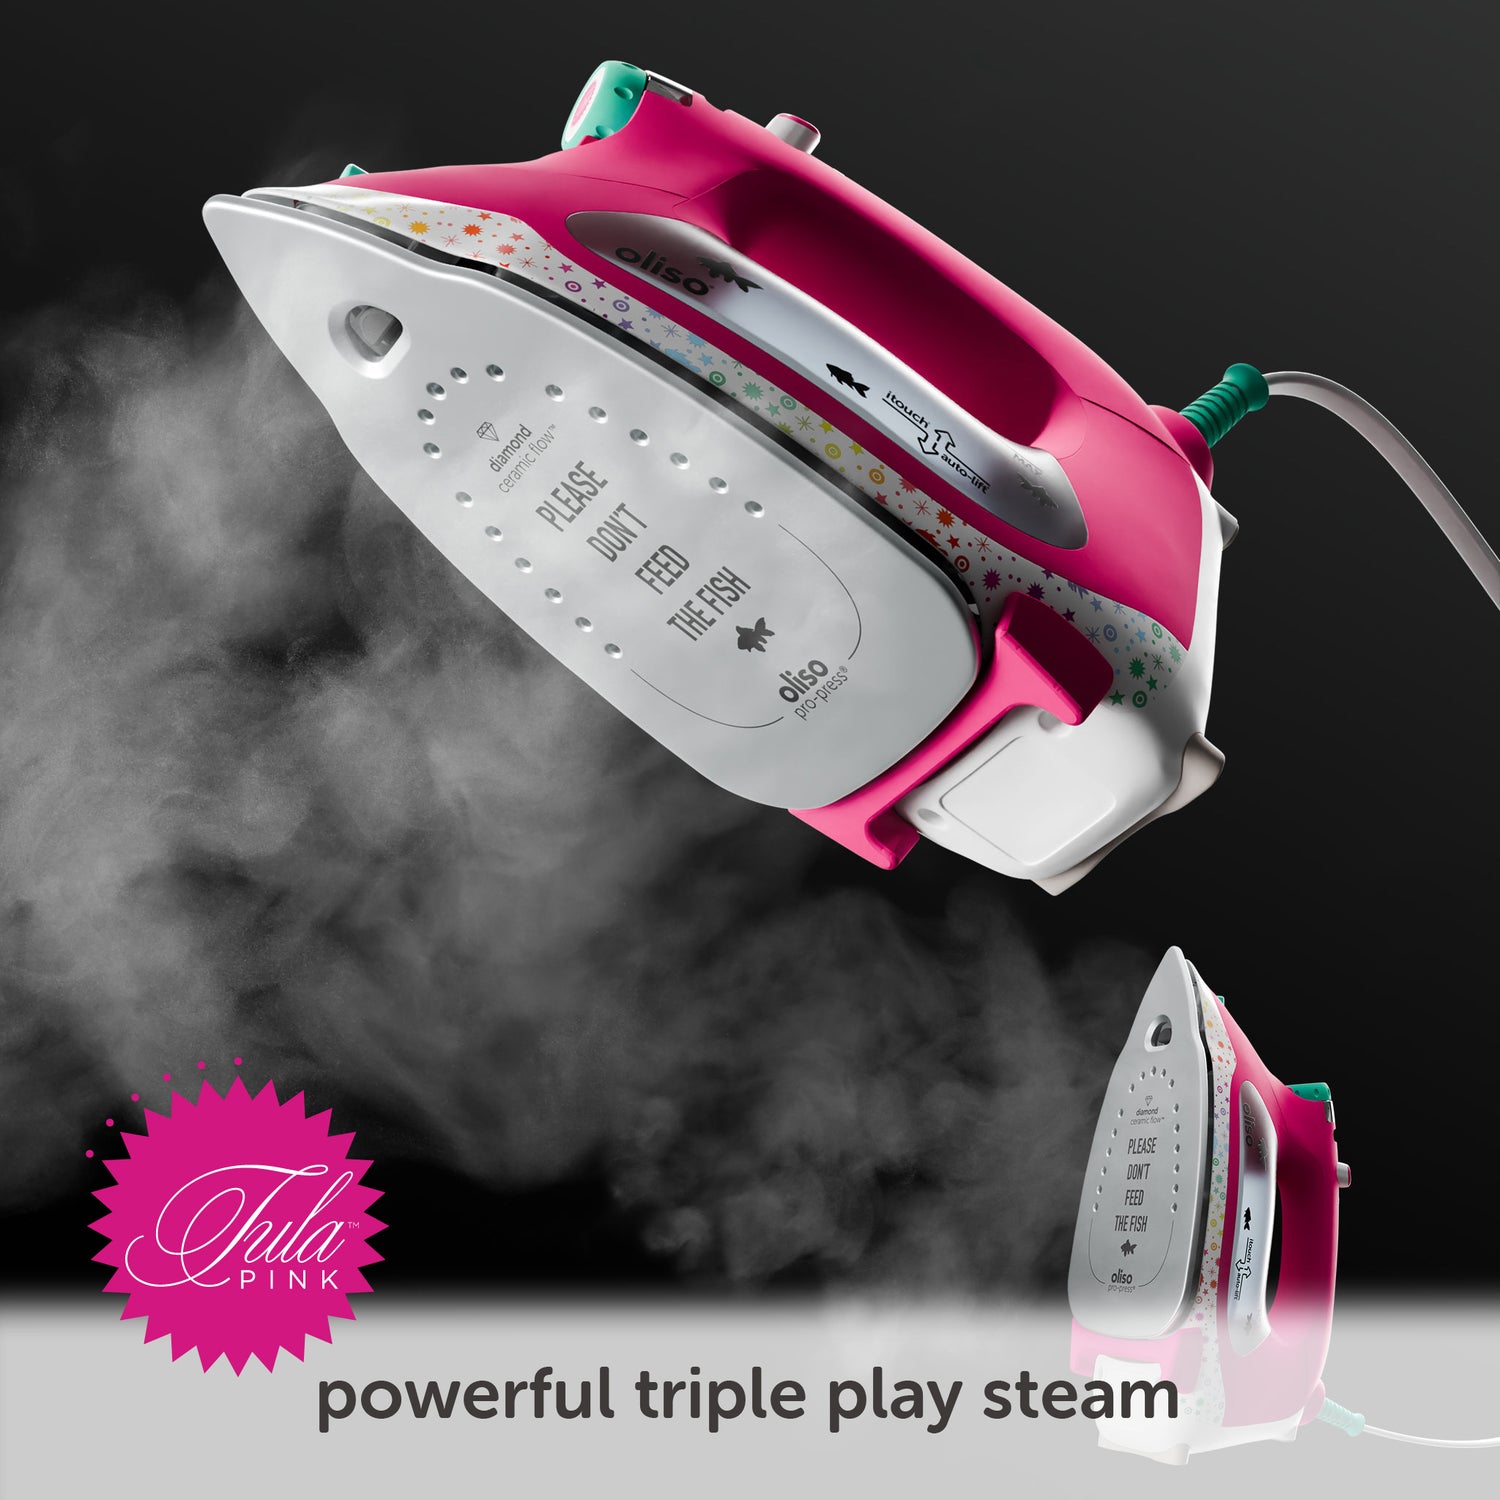 The ProPlus has a powerful burst of steam for pressing and vertical steaming.